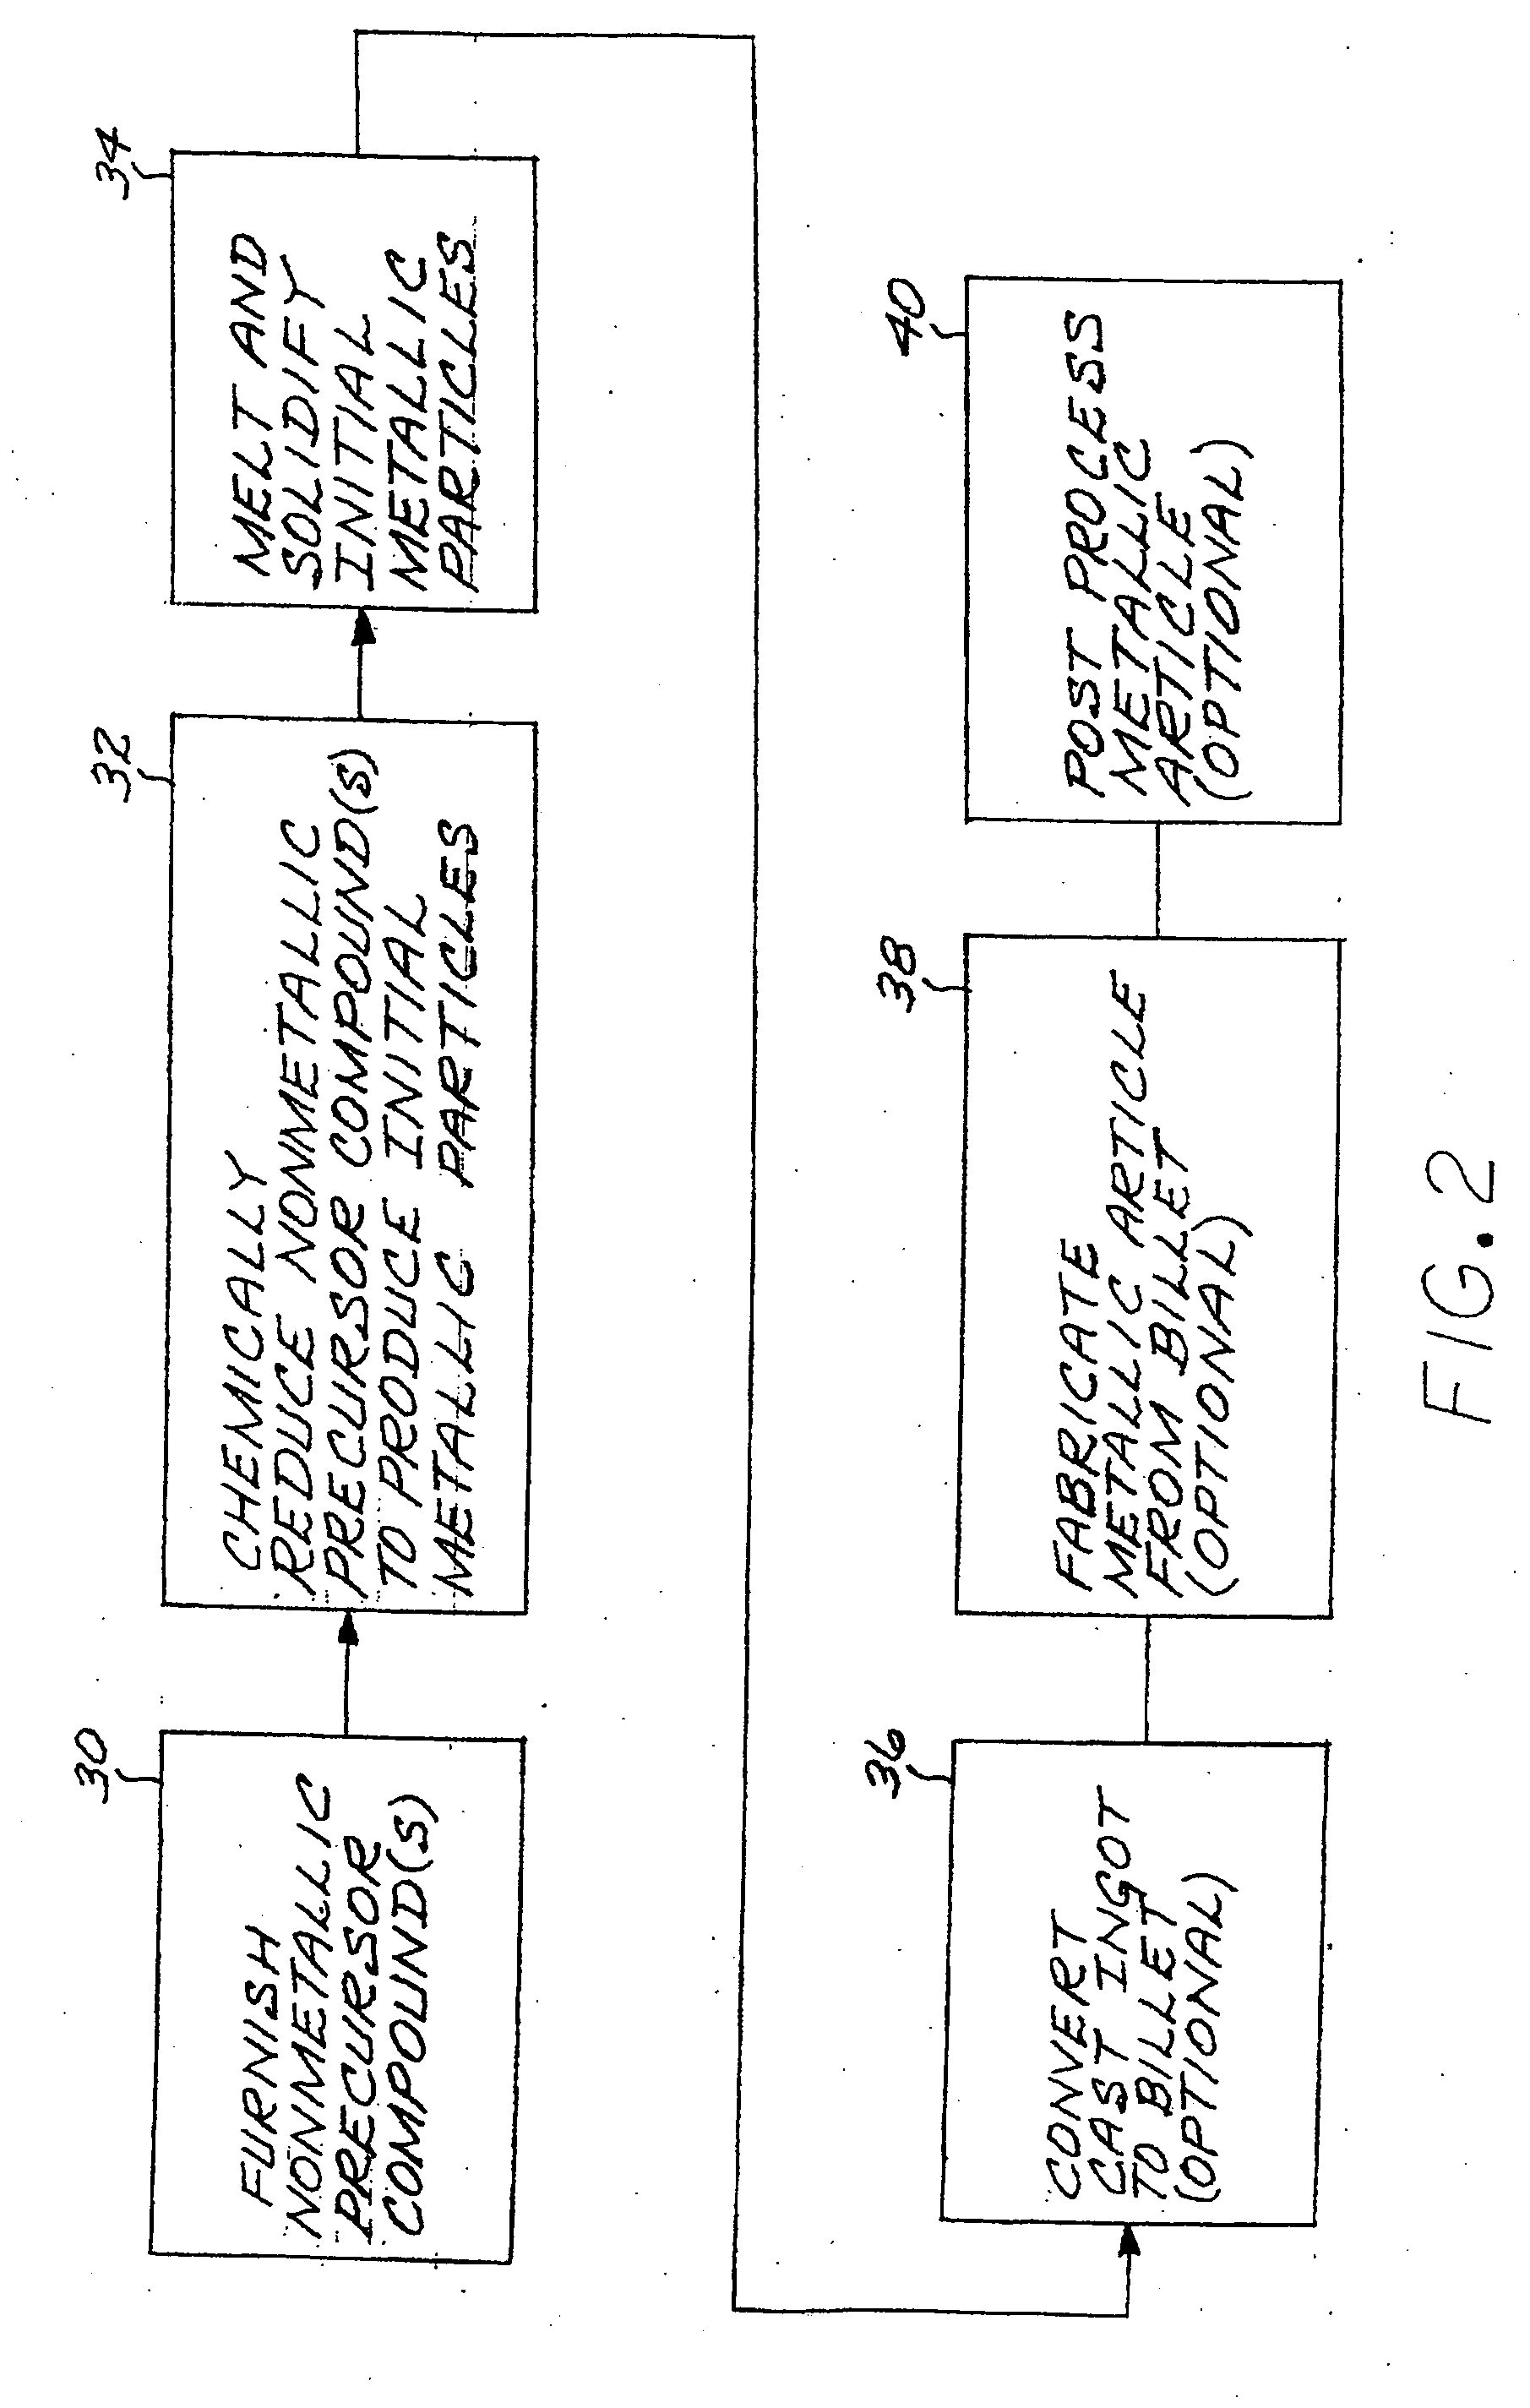 Producing nickel-base, cobalt-base, iron-base, iron-nickel-base, or iron-nickel-cobalt-base alloy articles by reduction of nonmetallic precursor compounds and melting